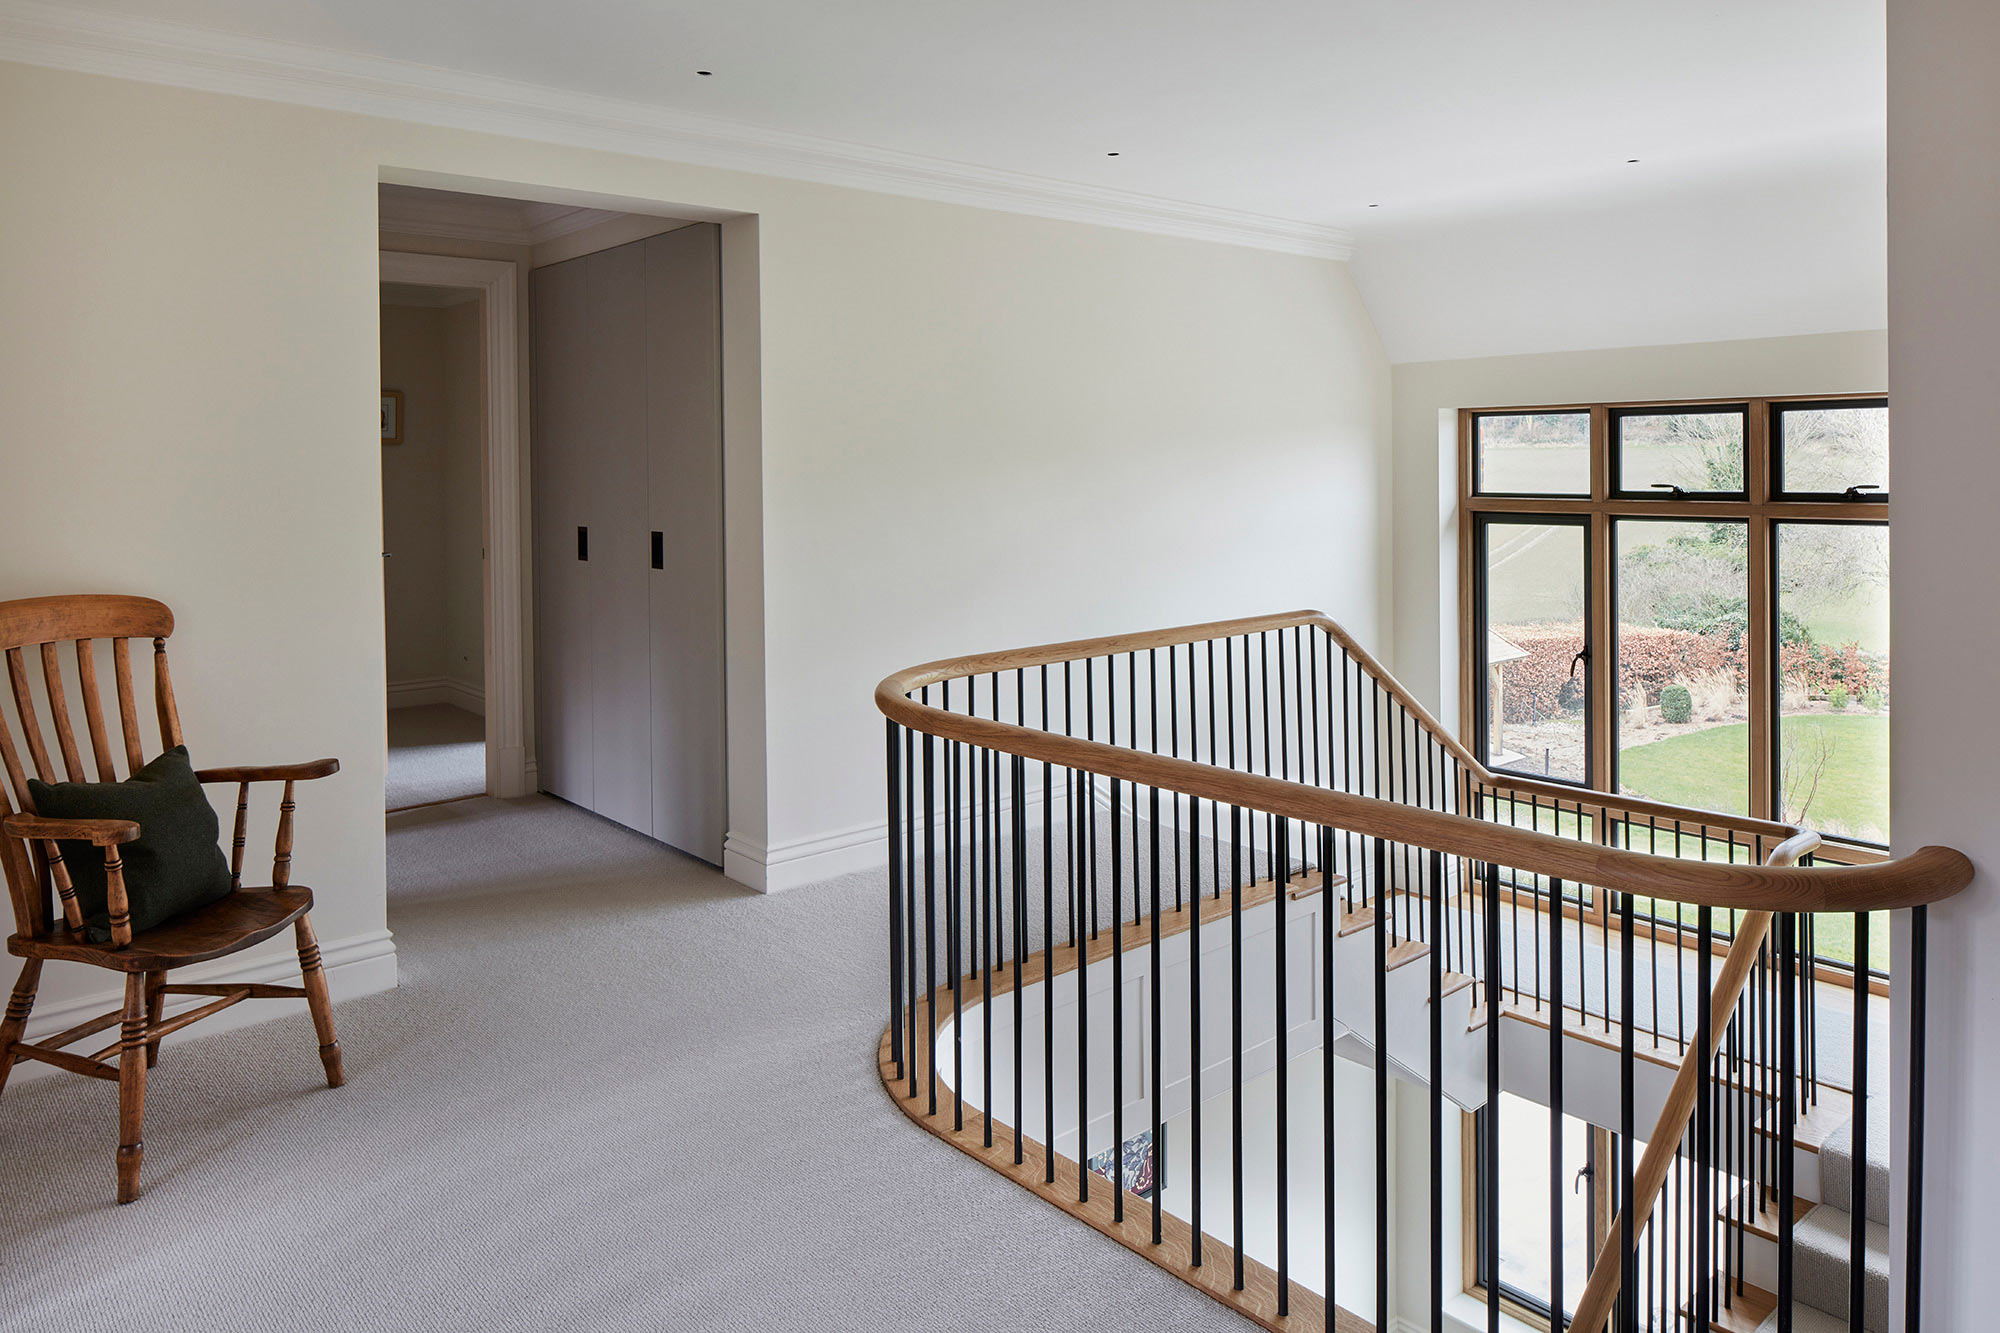 Landing with stair ballustrades and large window - New build by KM Grant Surrey